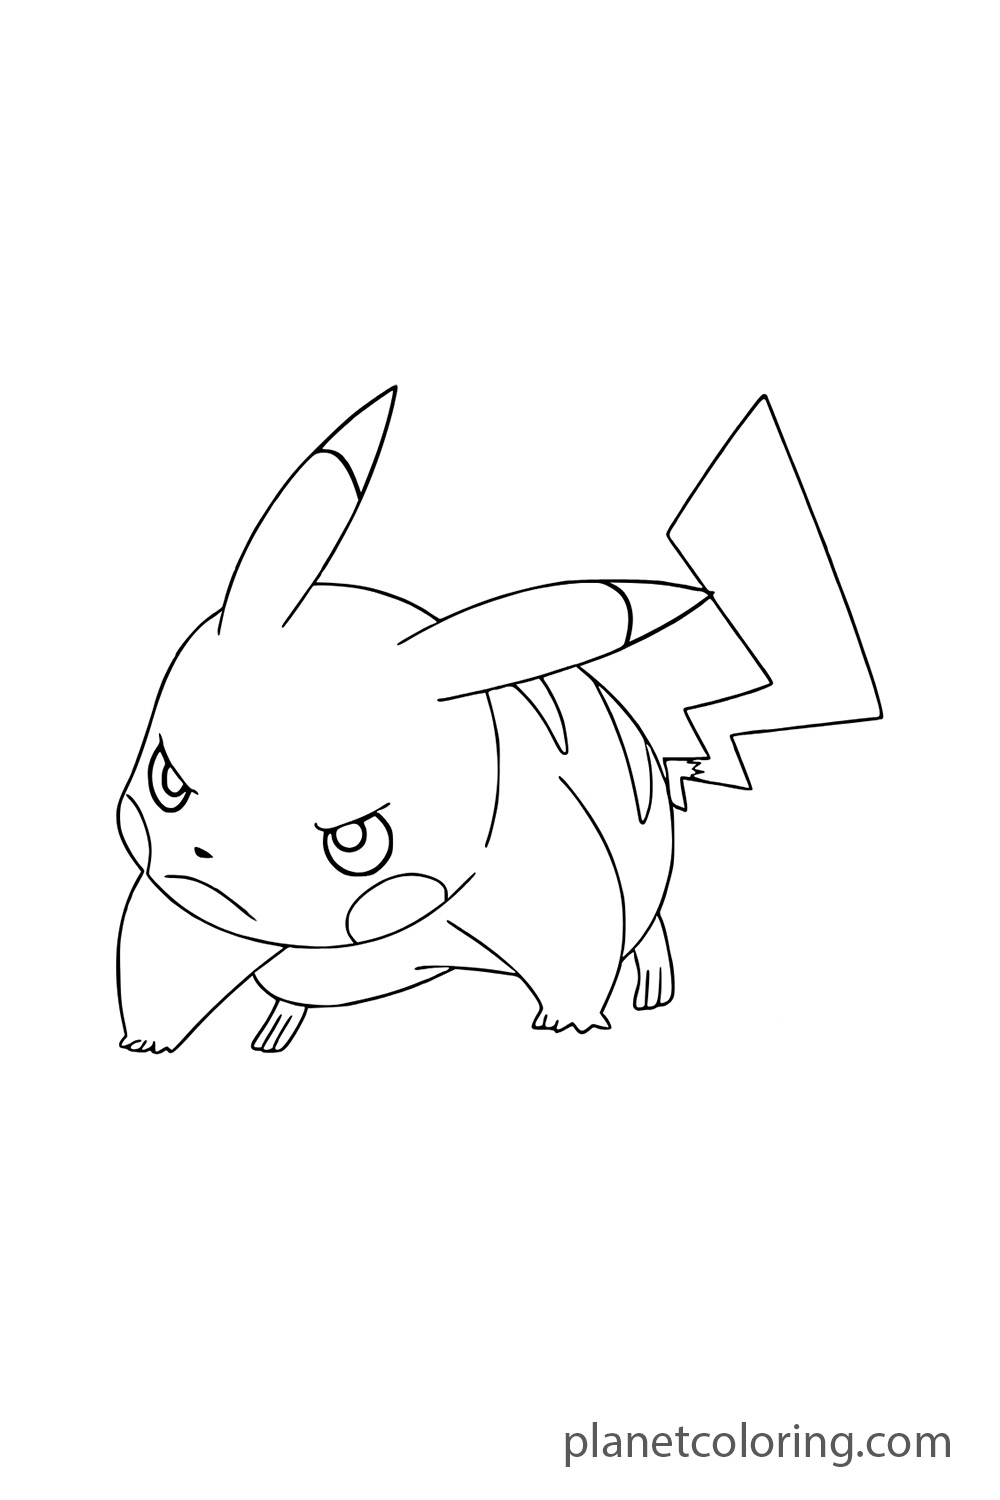 Pikachu with an angry expression